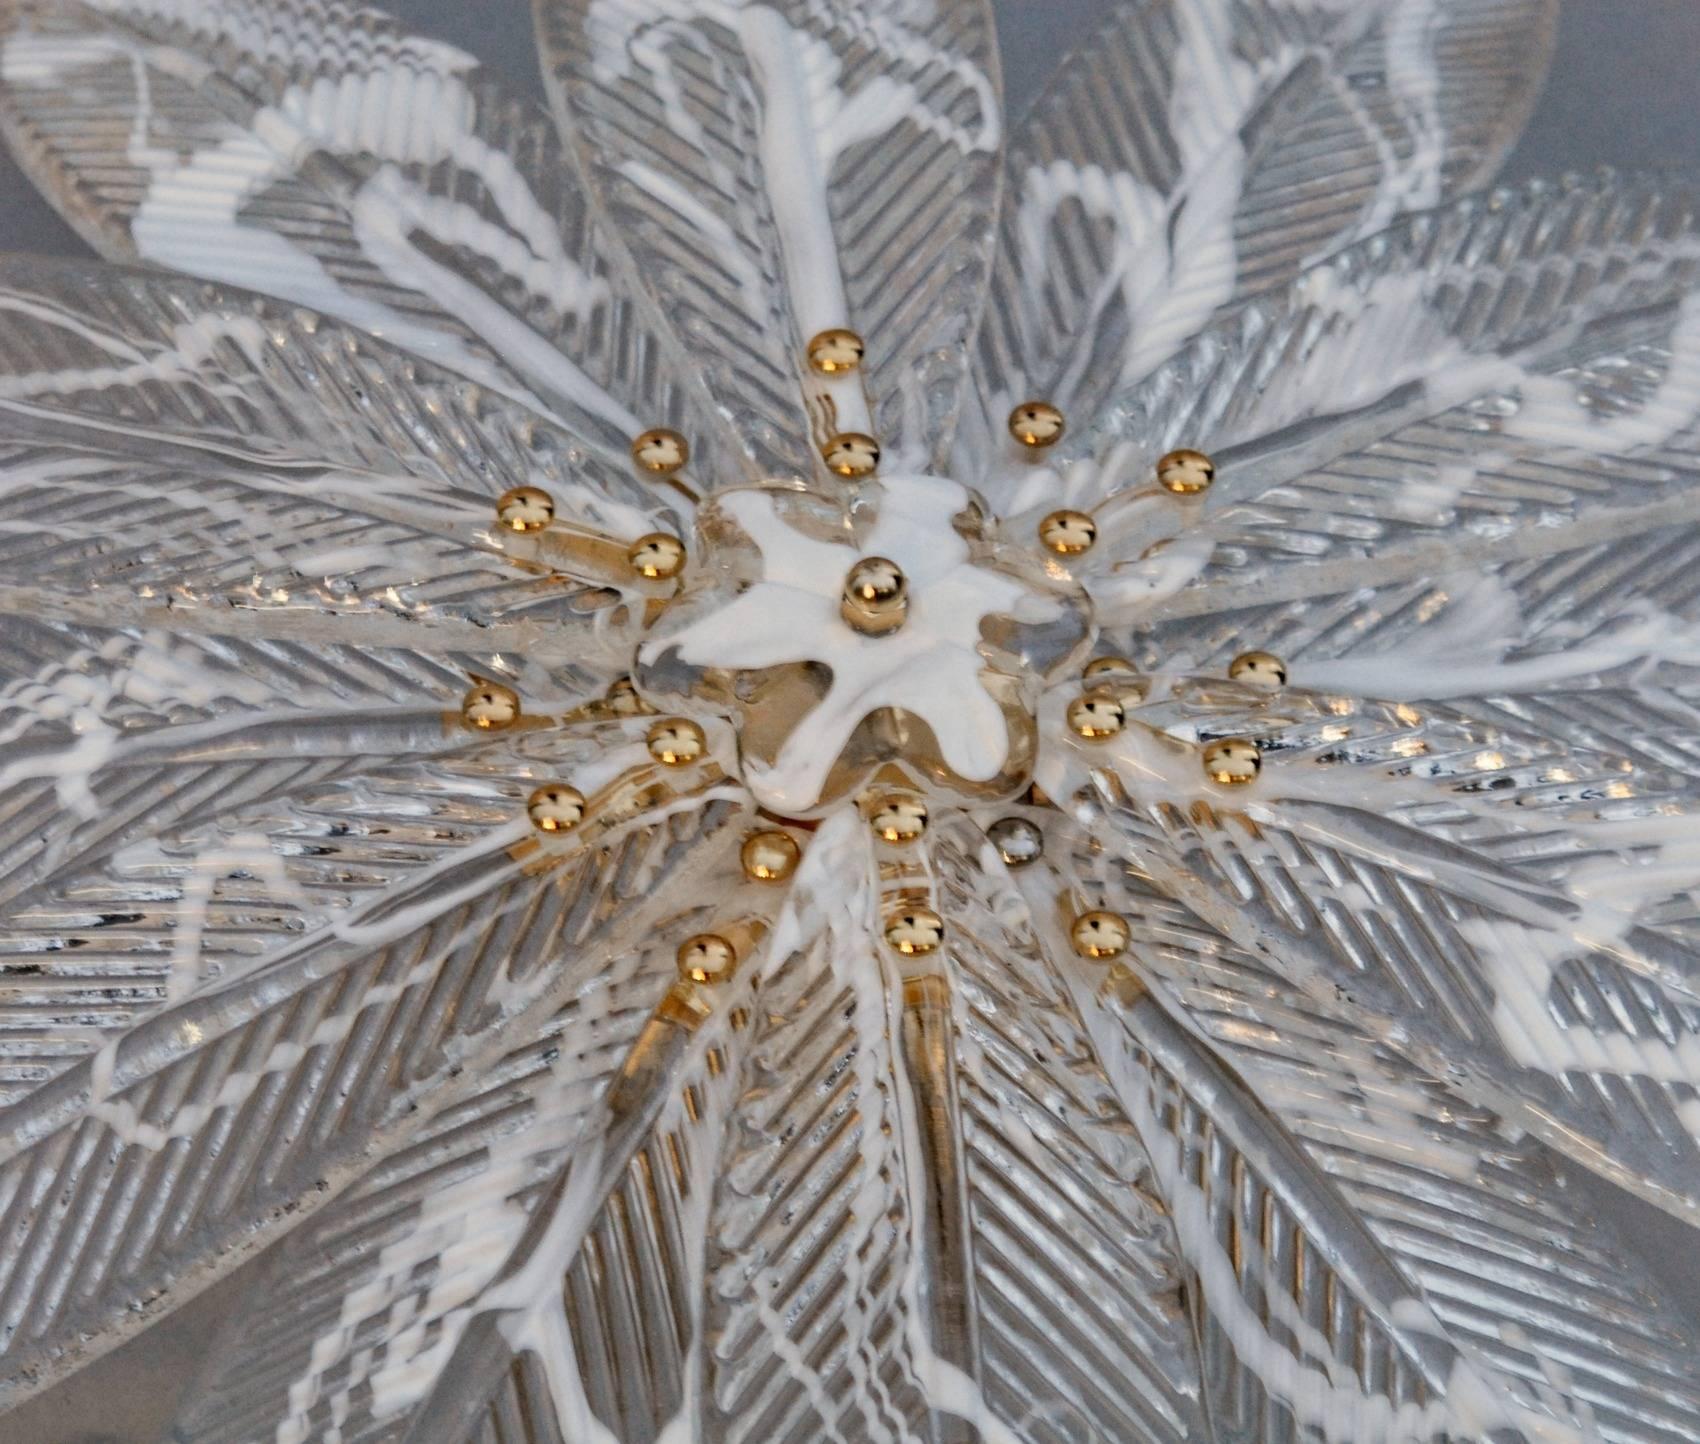 This shallow ceiling mount Murano chandelier was first designed for a luxury vessel ship low ceiling and now is used to pair with Mid-Century Modern Barovier palmette chandeliers, that are usually very tall. This beautiful 12 palm leaves flush mount